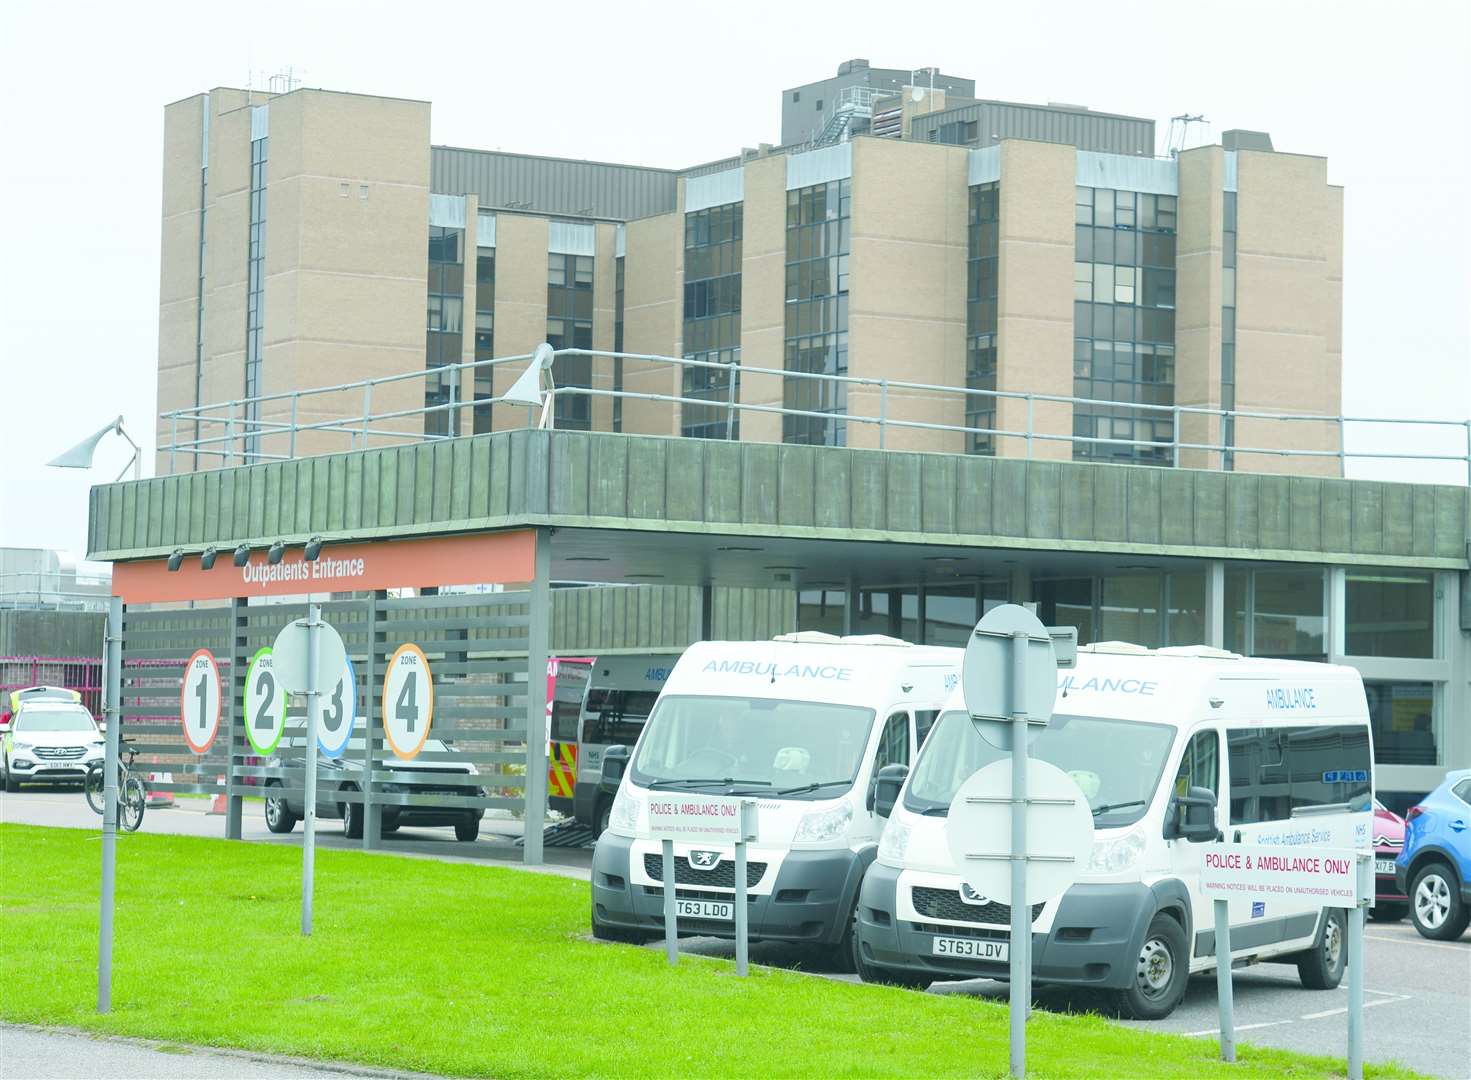 Raigmore Hospital is 'very busy' today according to NHS Highland.